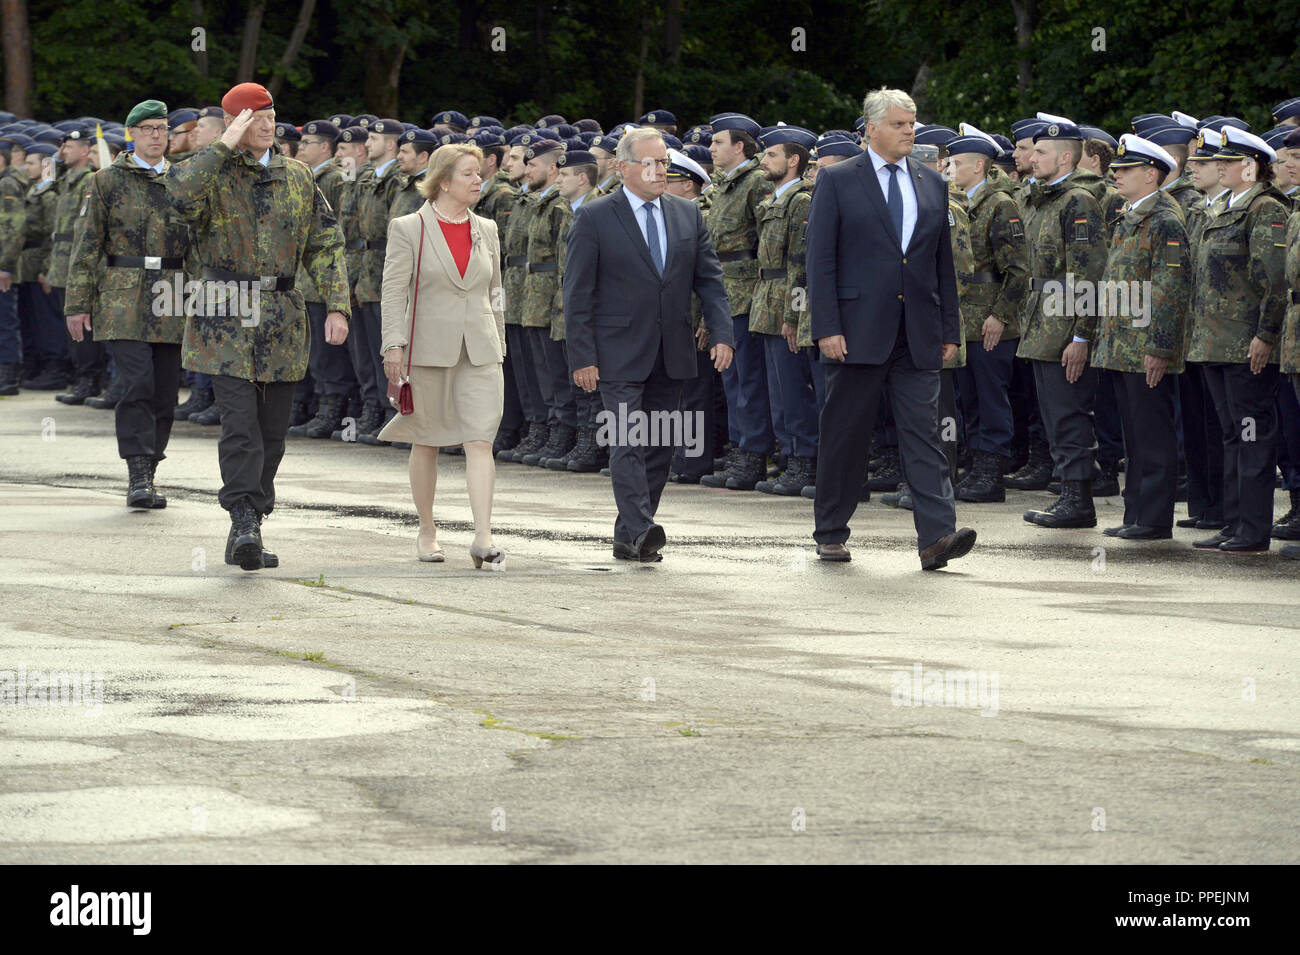 Officials of the Bundeswehr during the solemn roll call on the Open Door Day at the University of the Bundeswehr in Neubiberg. In the picture, university president Merith Niehuss (2nd row) and Markus Grübel (r.), Parliamentary State Secretary at the Federal Ministry of Defence, inspect the soldiers. Stock Photo